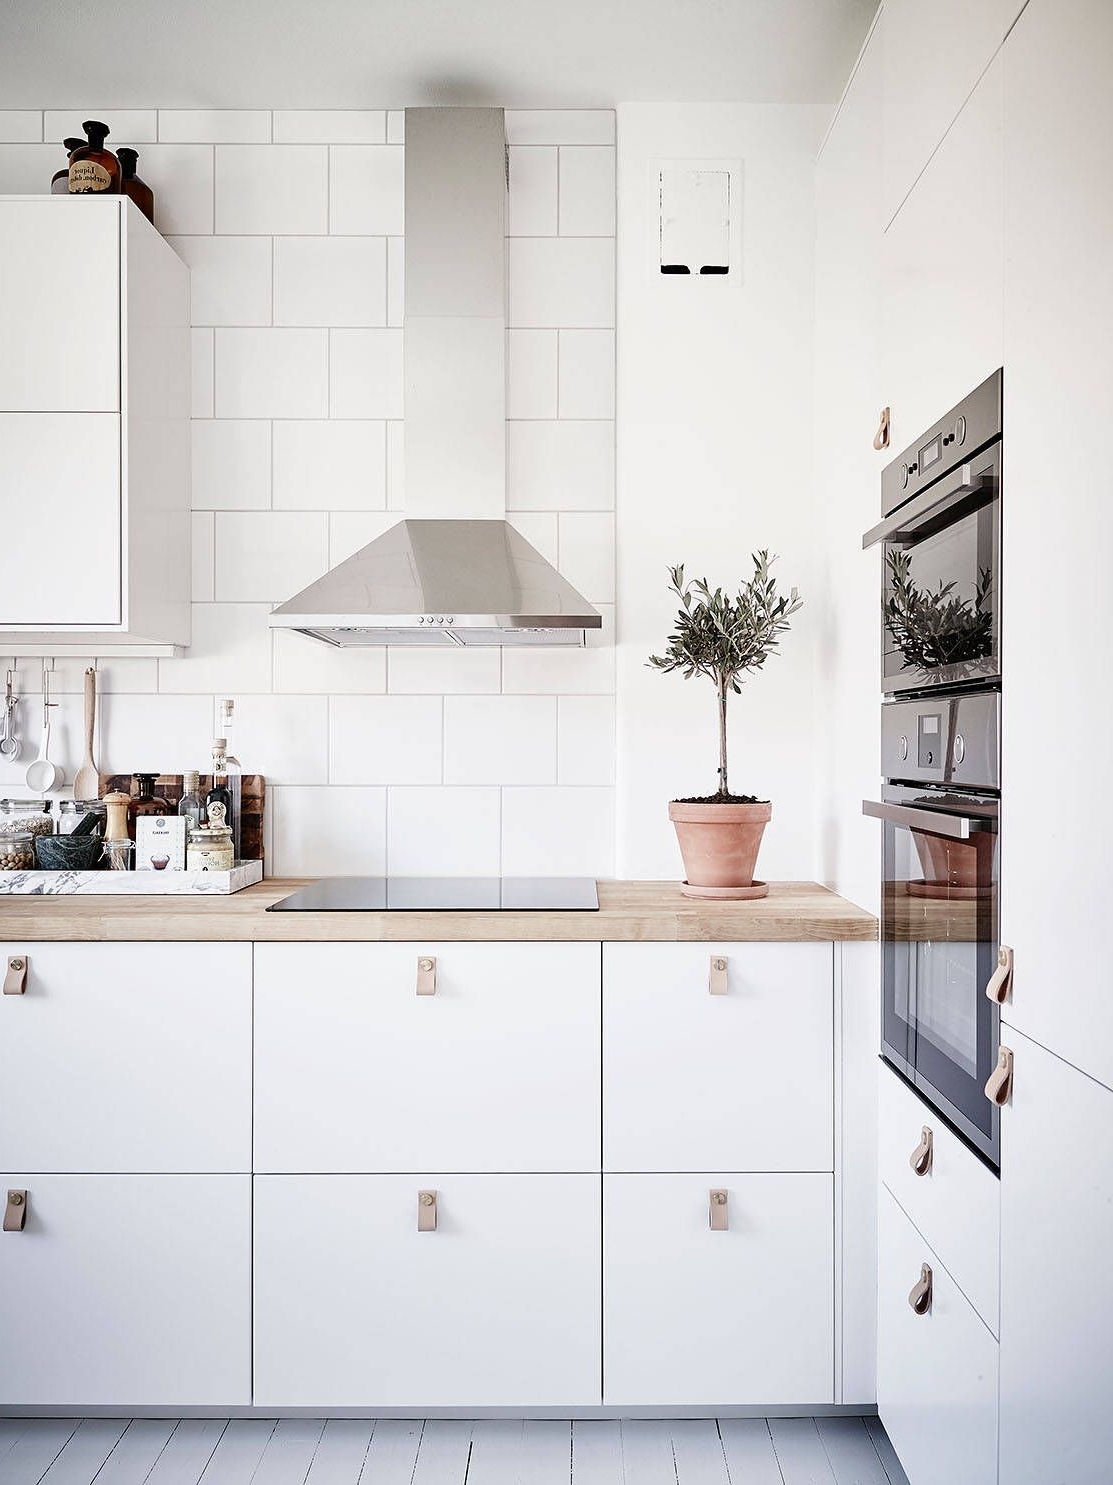 Top 10 Tips For Adding Scandinavian Style To Your Home